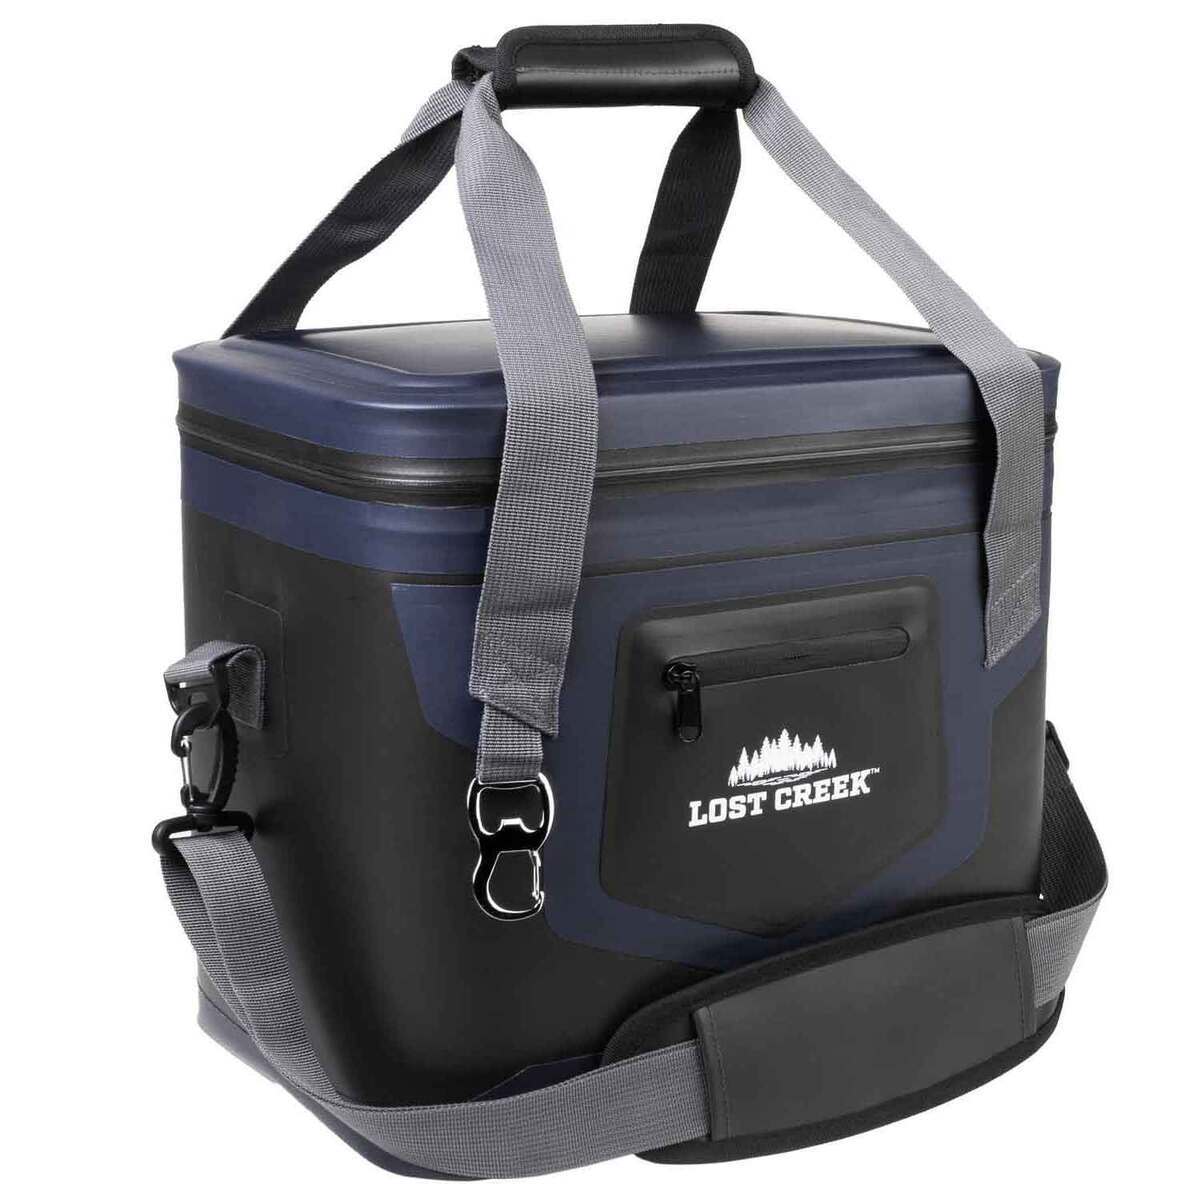 Soft Pack Coolers. Insulated Cooler Bags  Soft cooler, Soft sided coolers,  Floating cooler